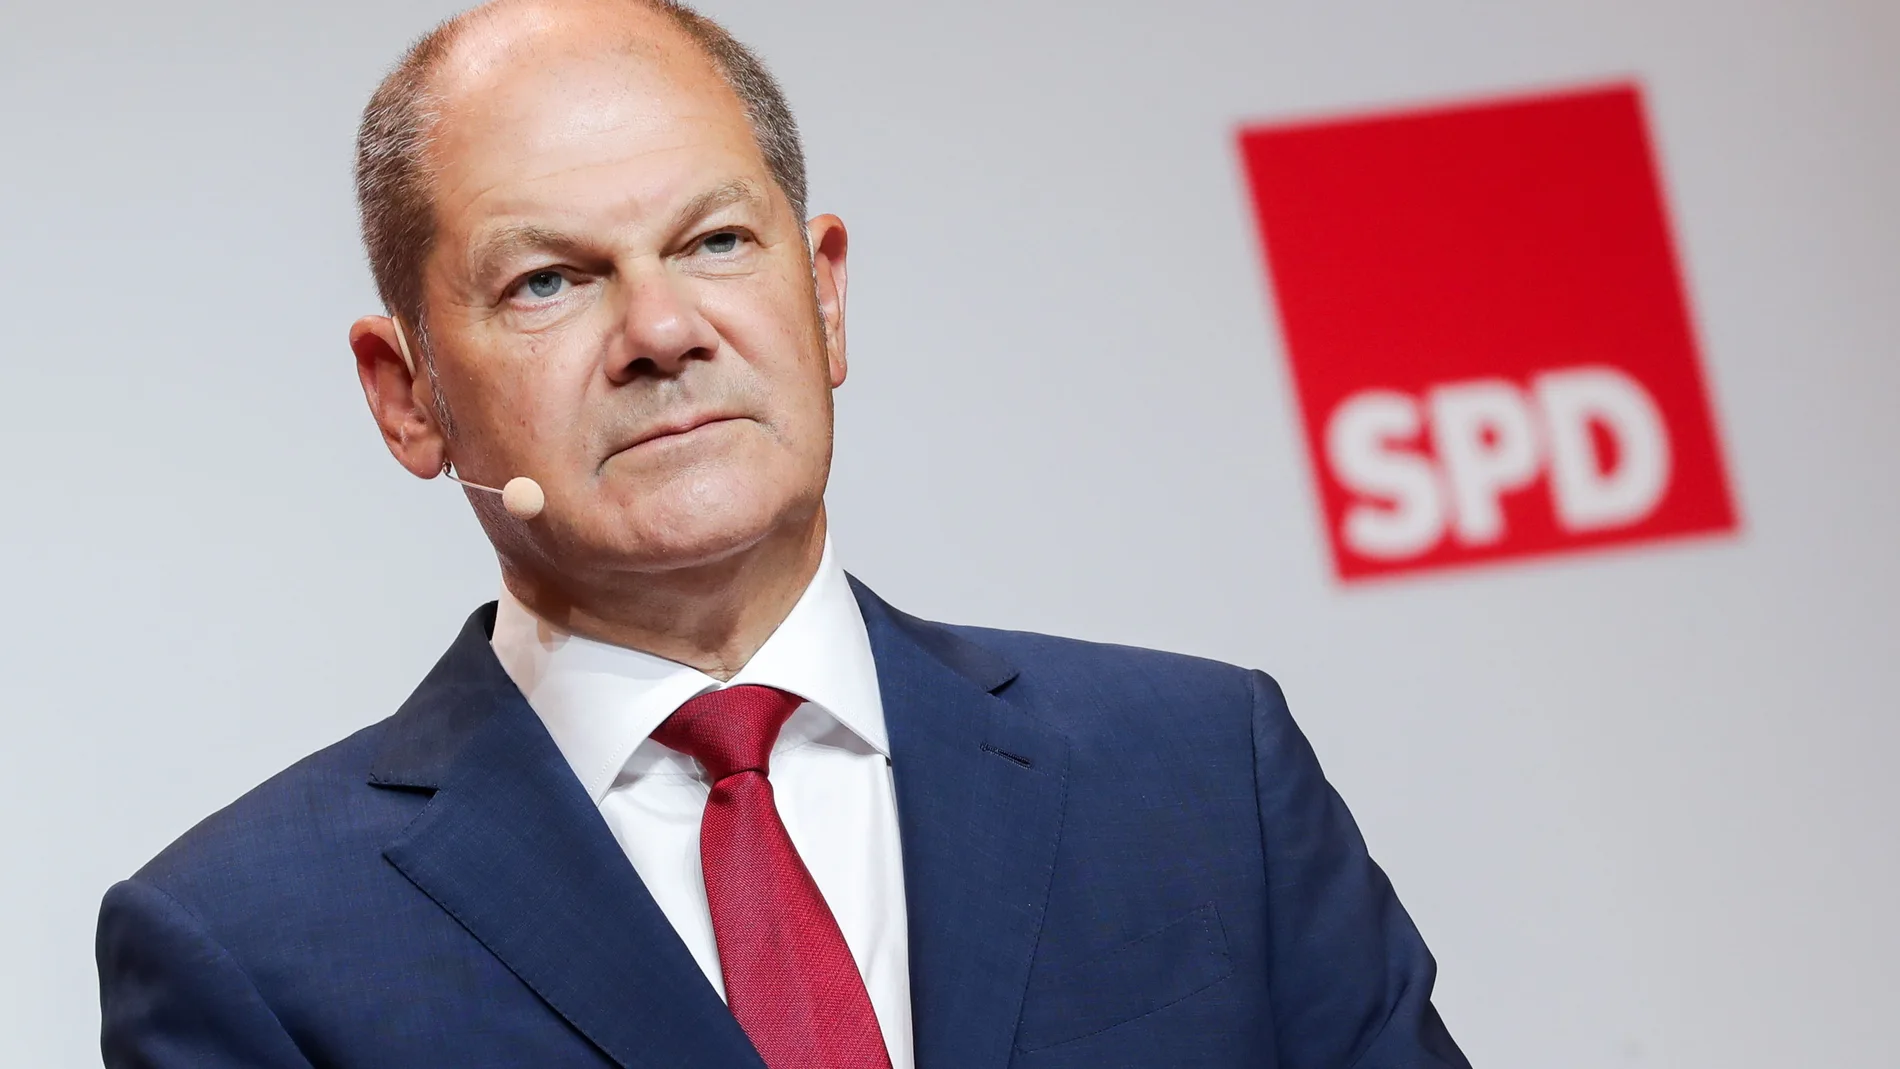 German Minister of Finance Olaf Scholz announces to run for chancelorship